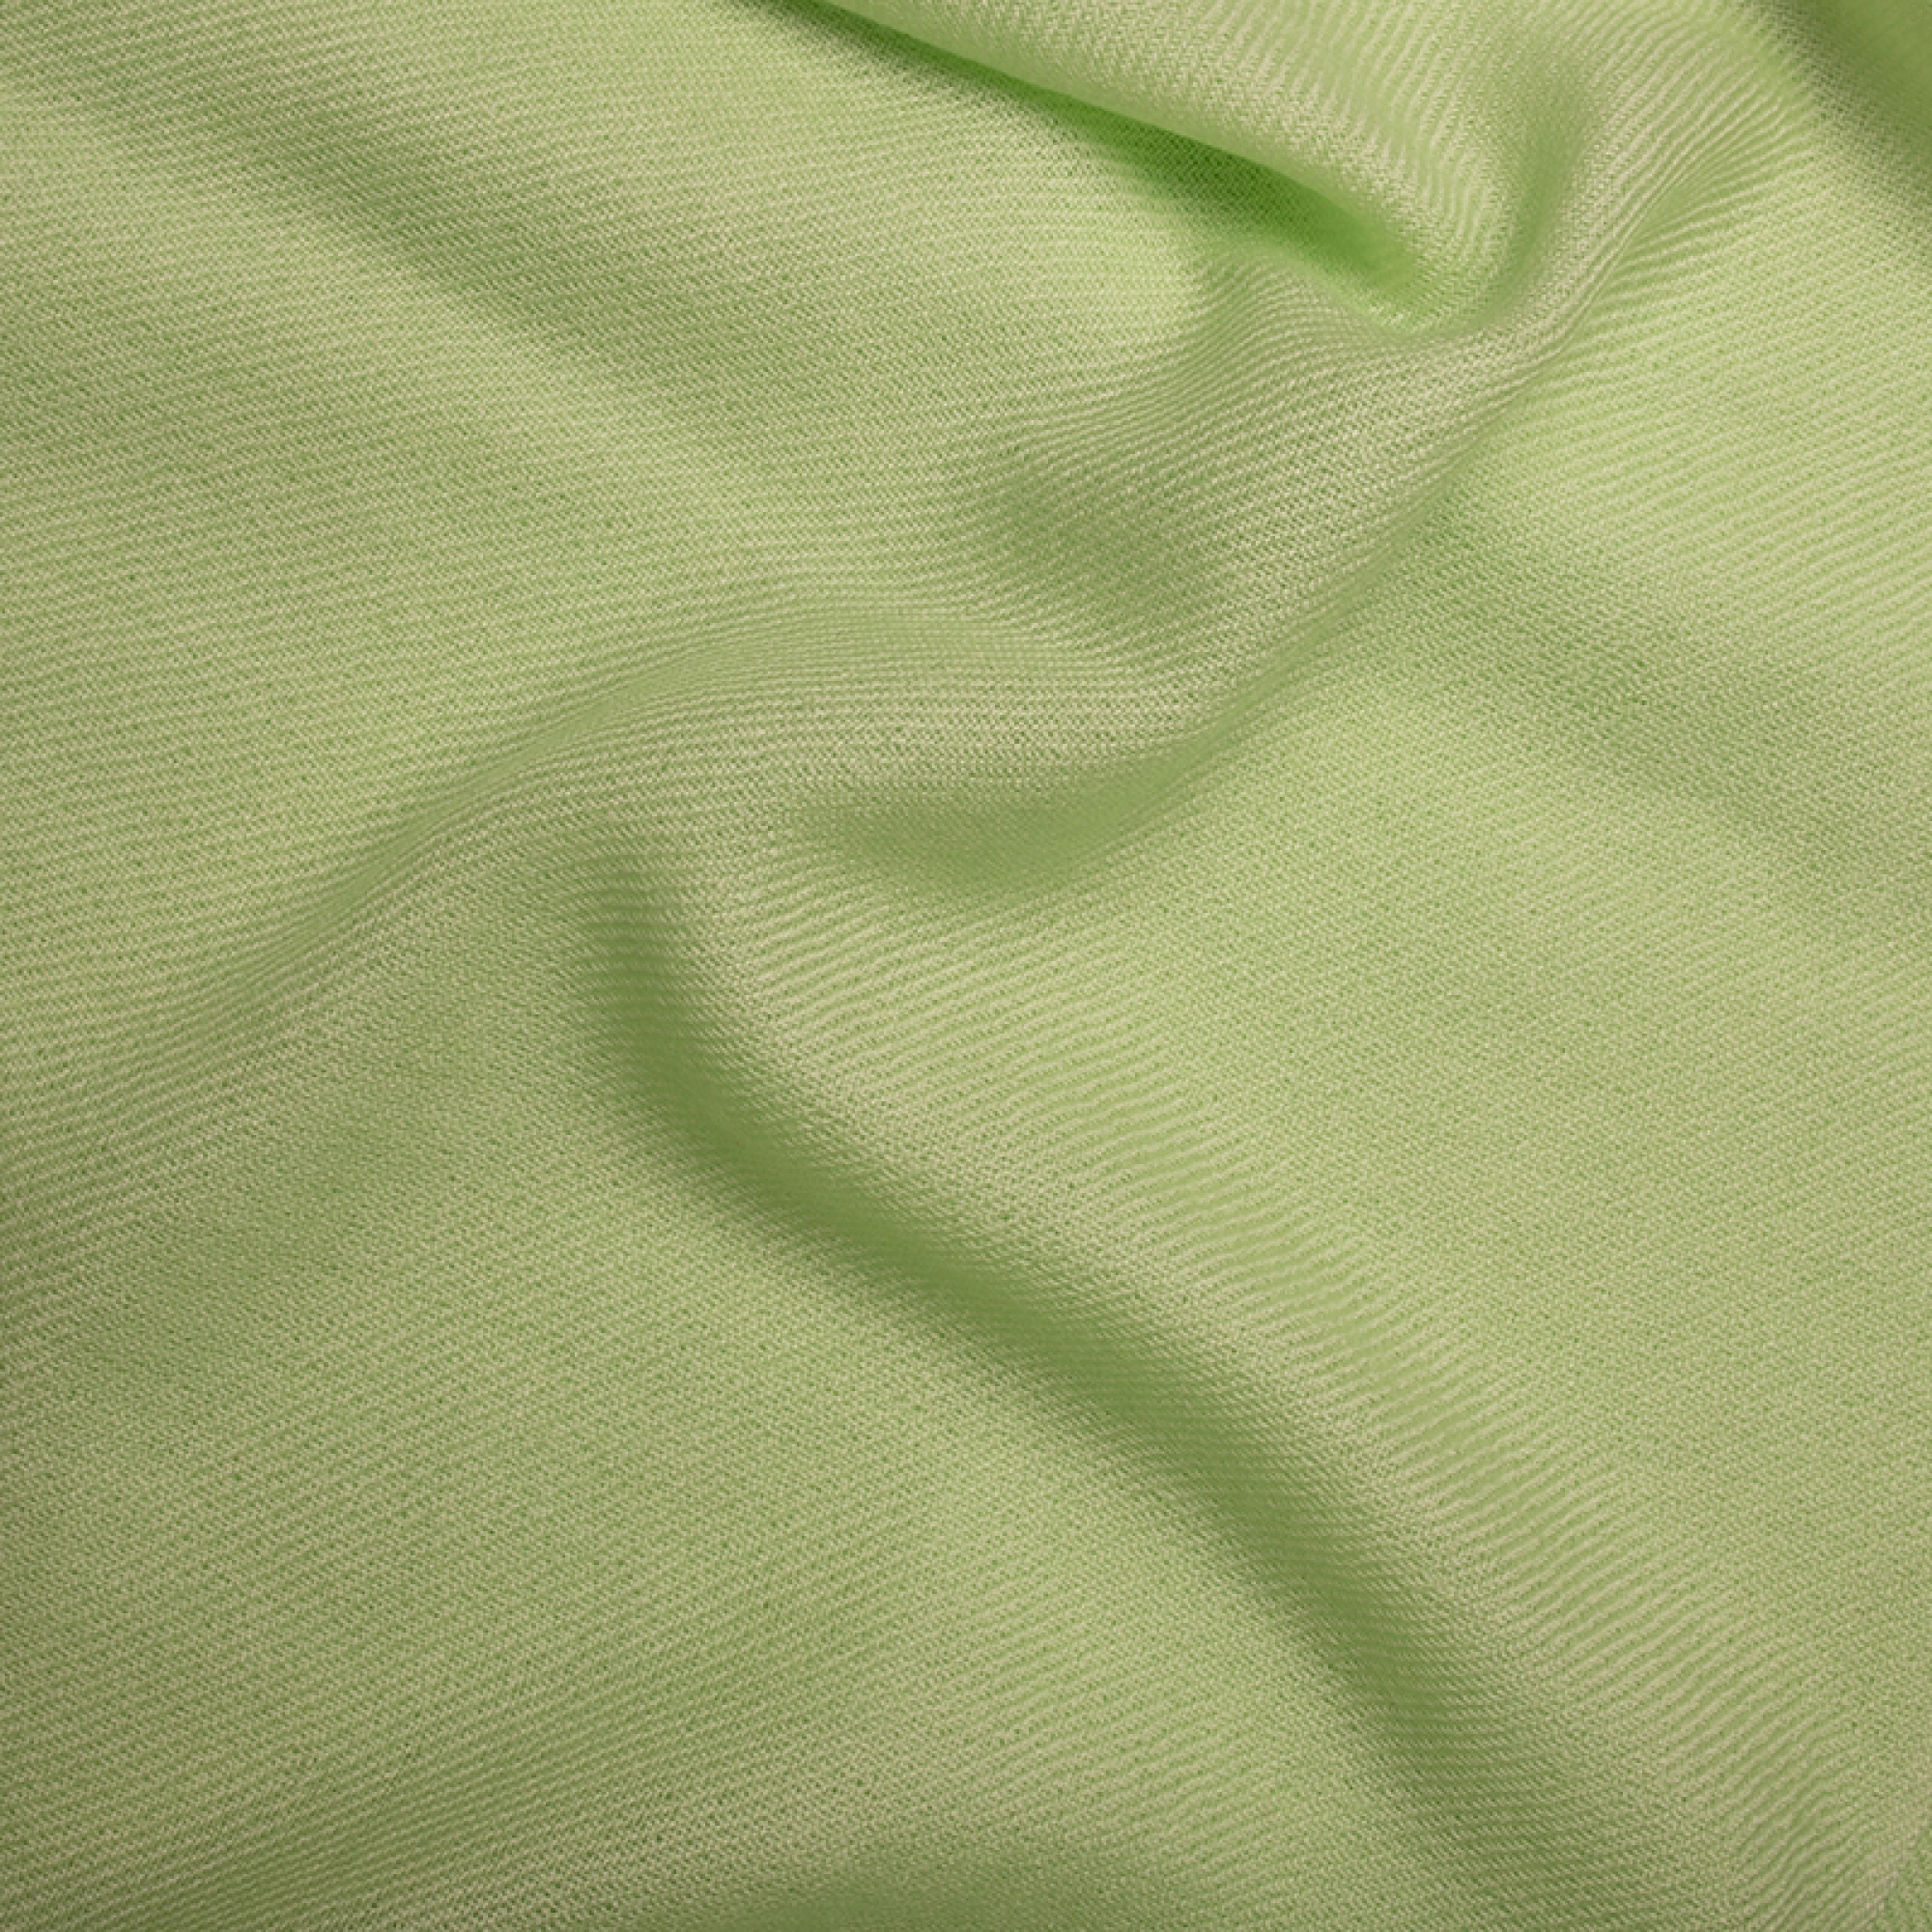 Cashmere ladies cocooning toodoo plain l 220 x 220 lime green 220x220cm